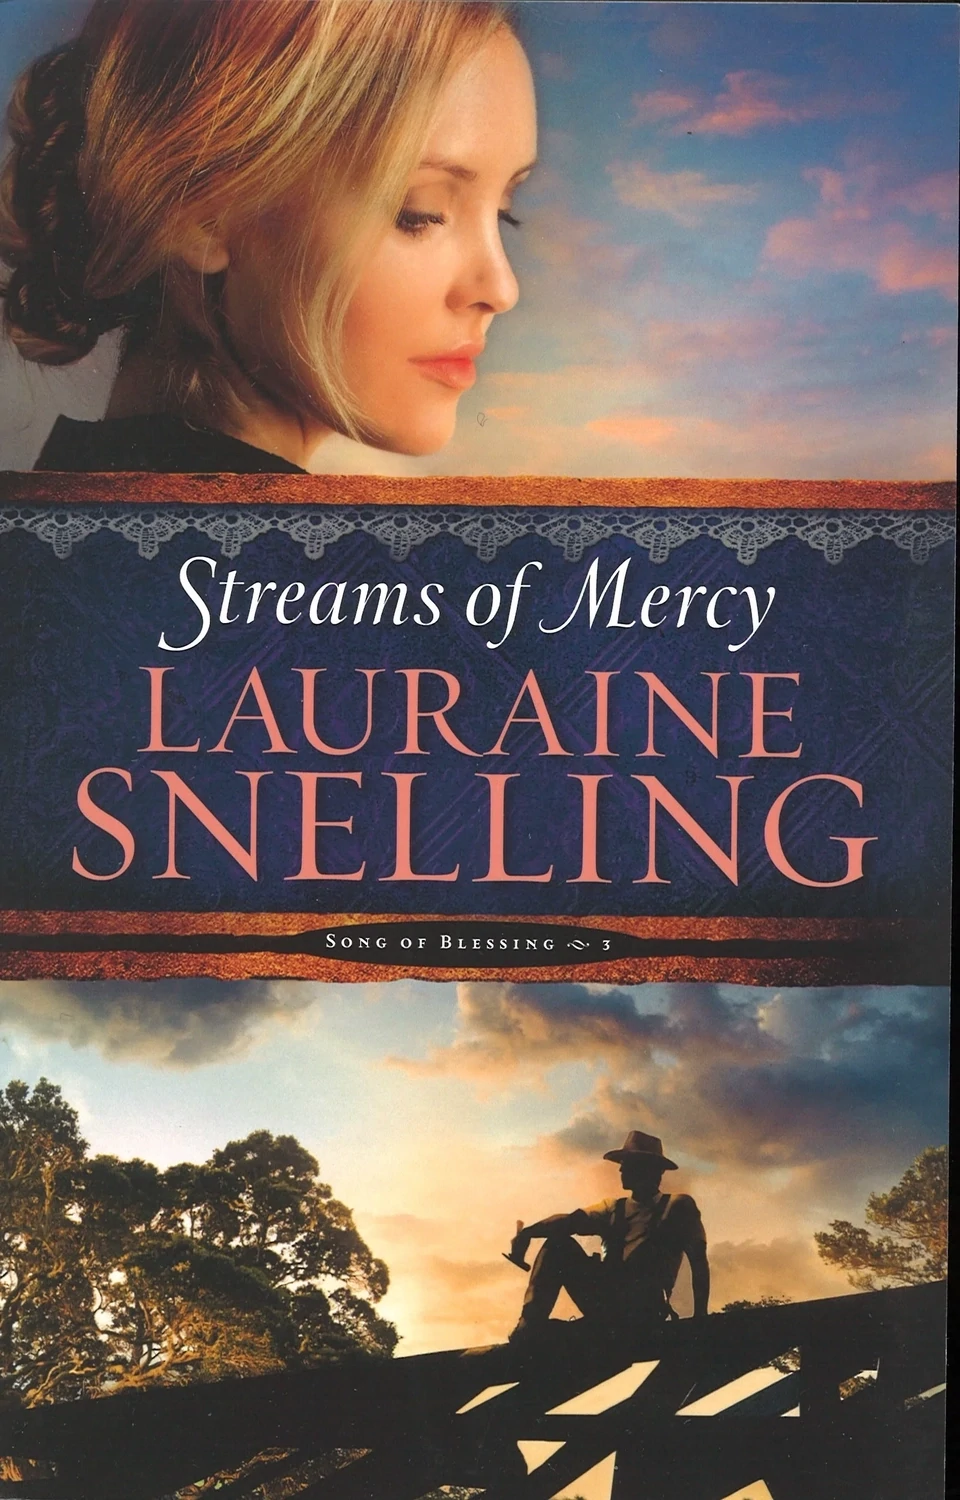 Streams of Mercy (Song of Blessing, 3), Lauraine Snelling